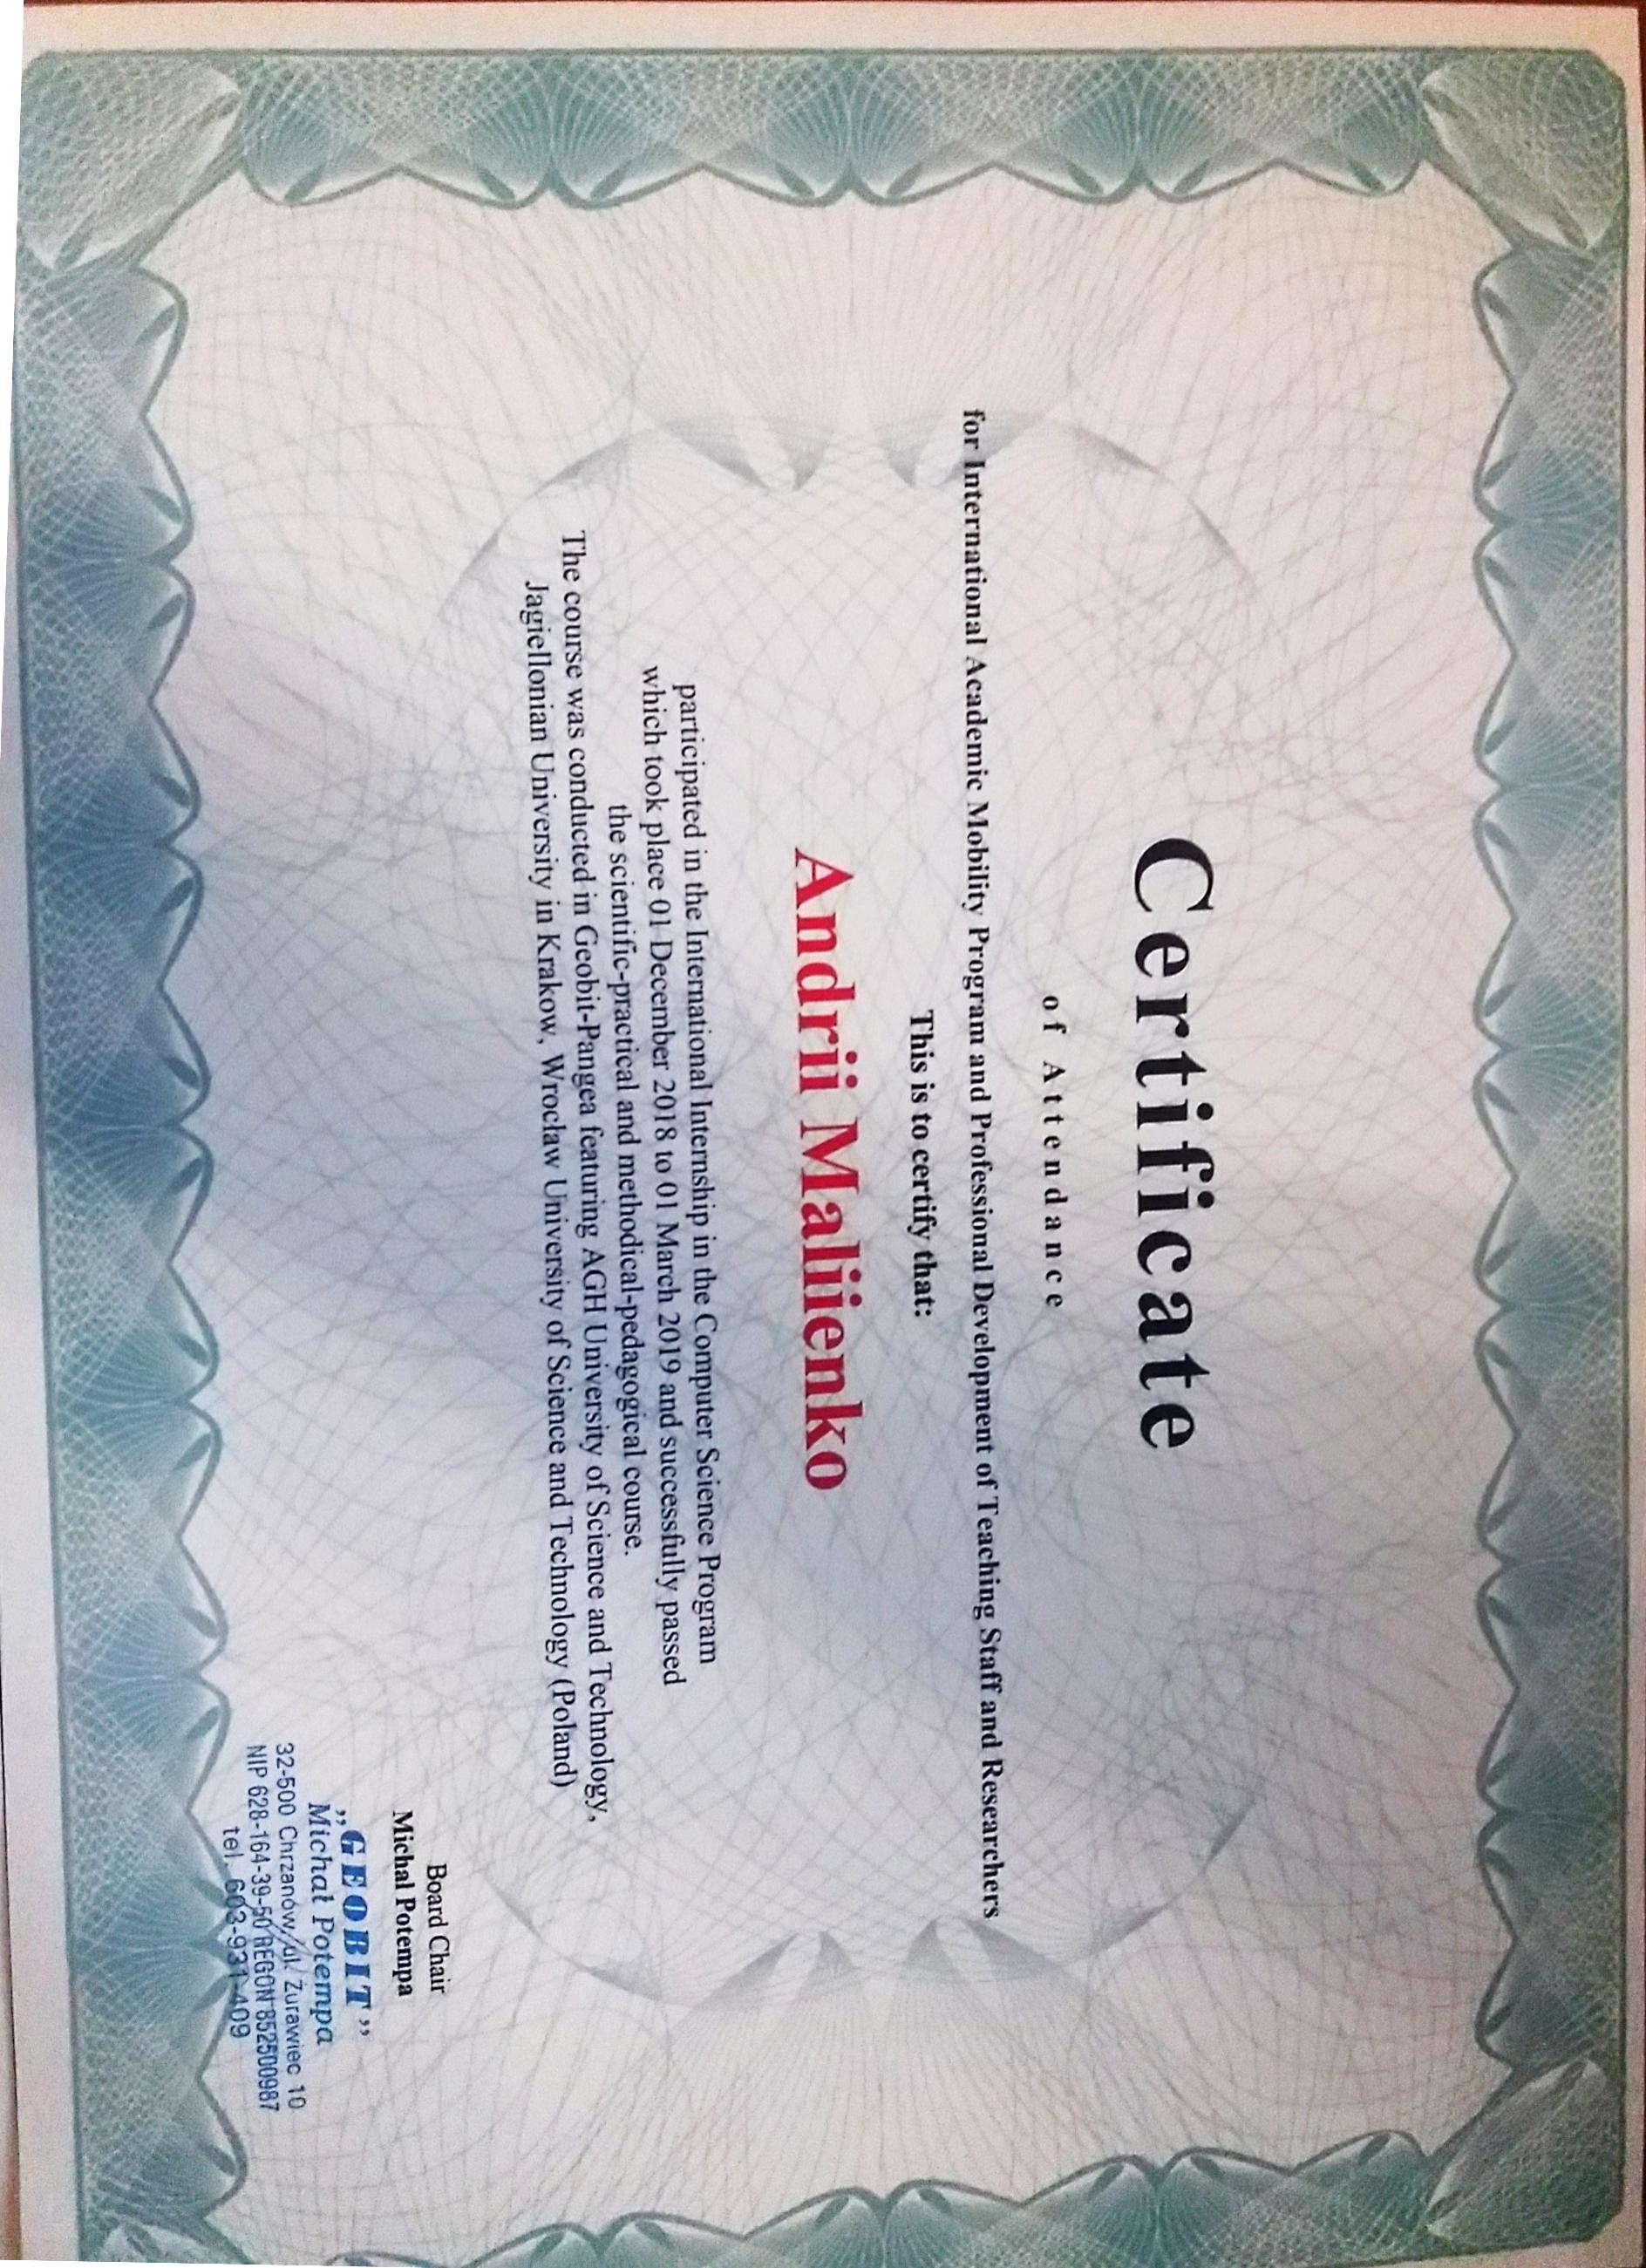 CERTIFICATE is issued to: Malienko Andrii